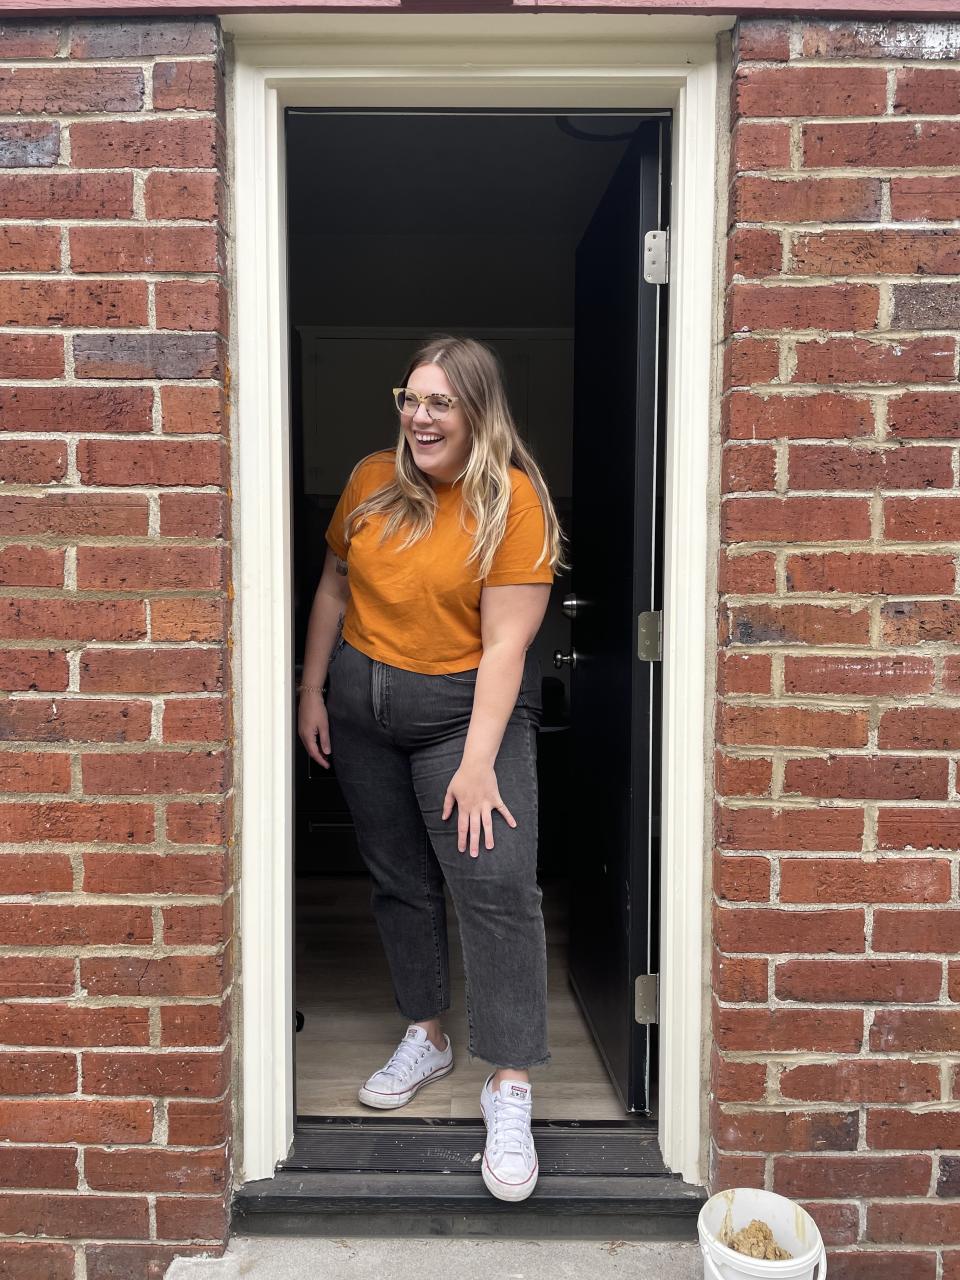 Karli standing in a doorway smiling, dressed in casual attire